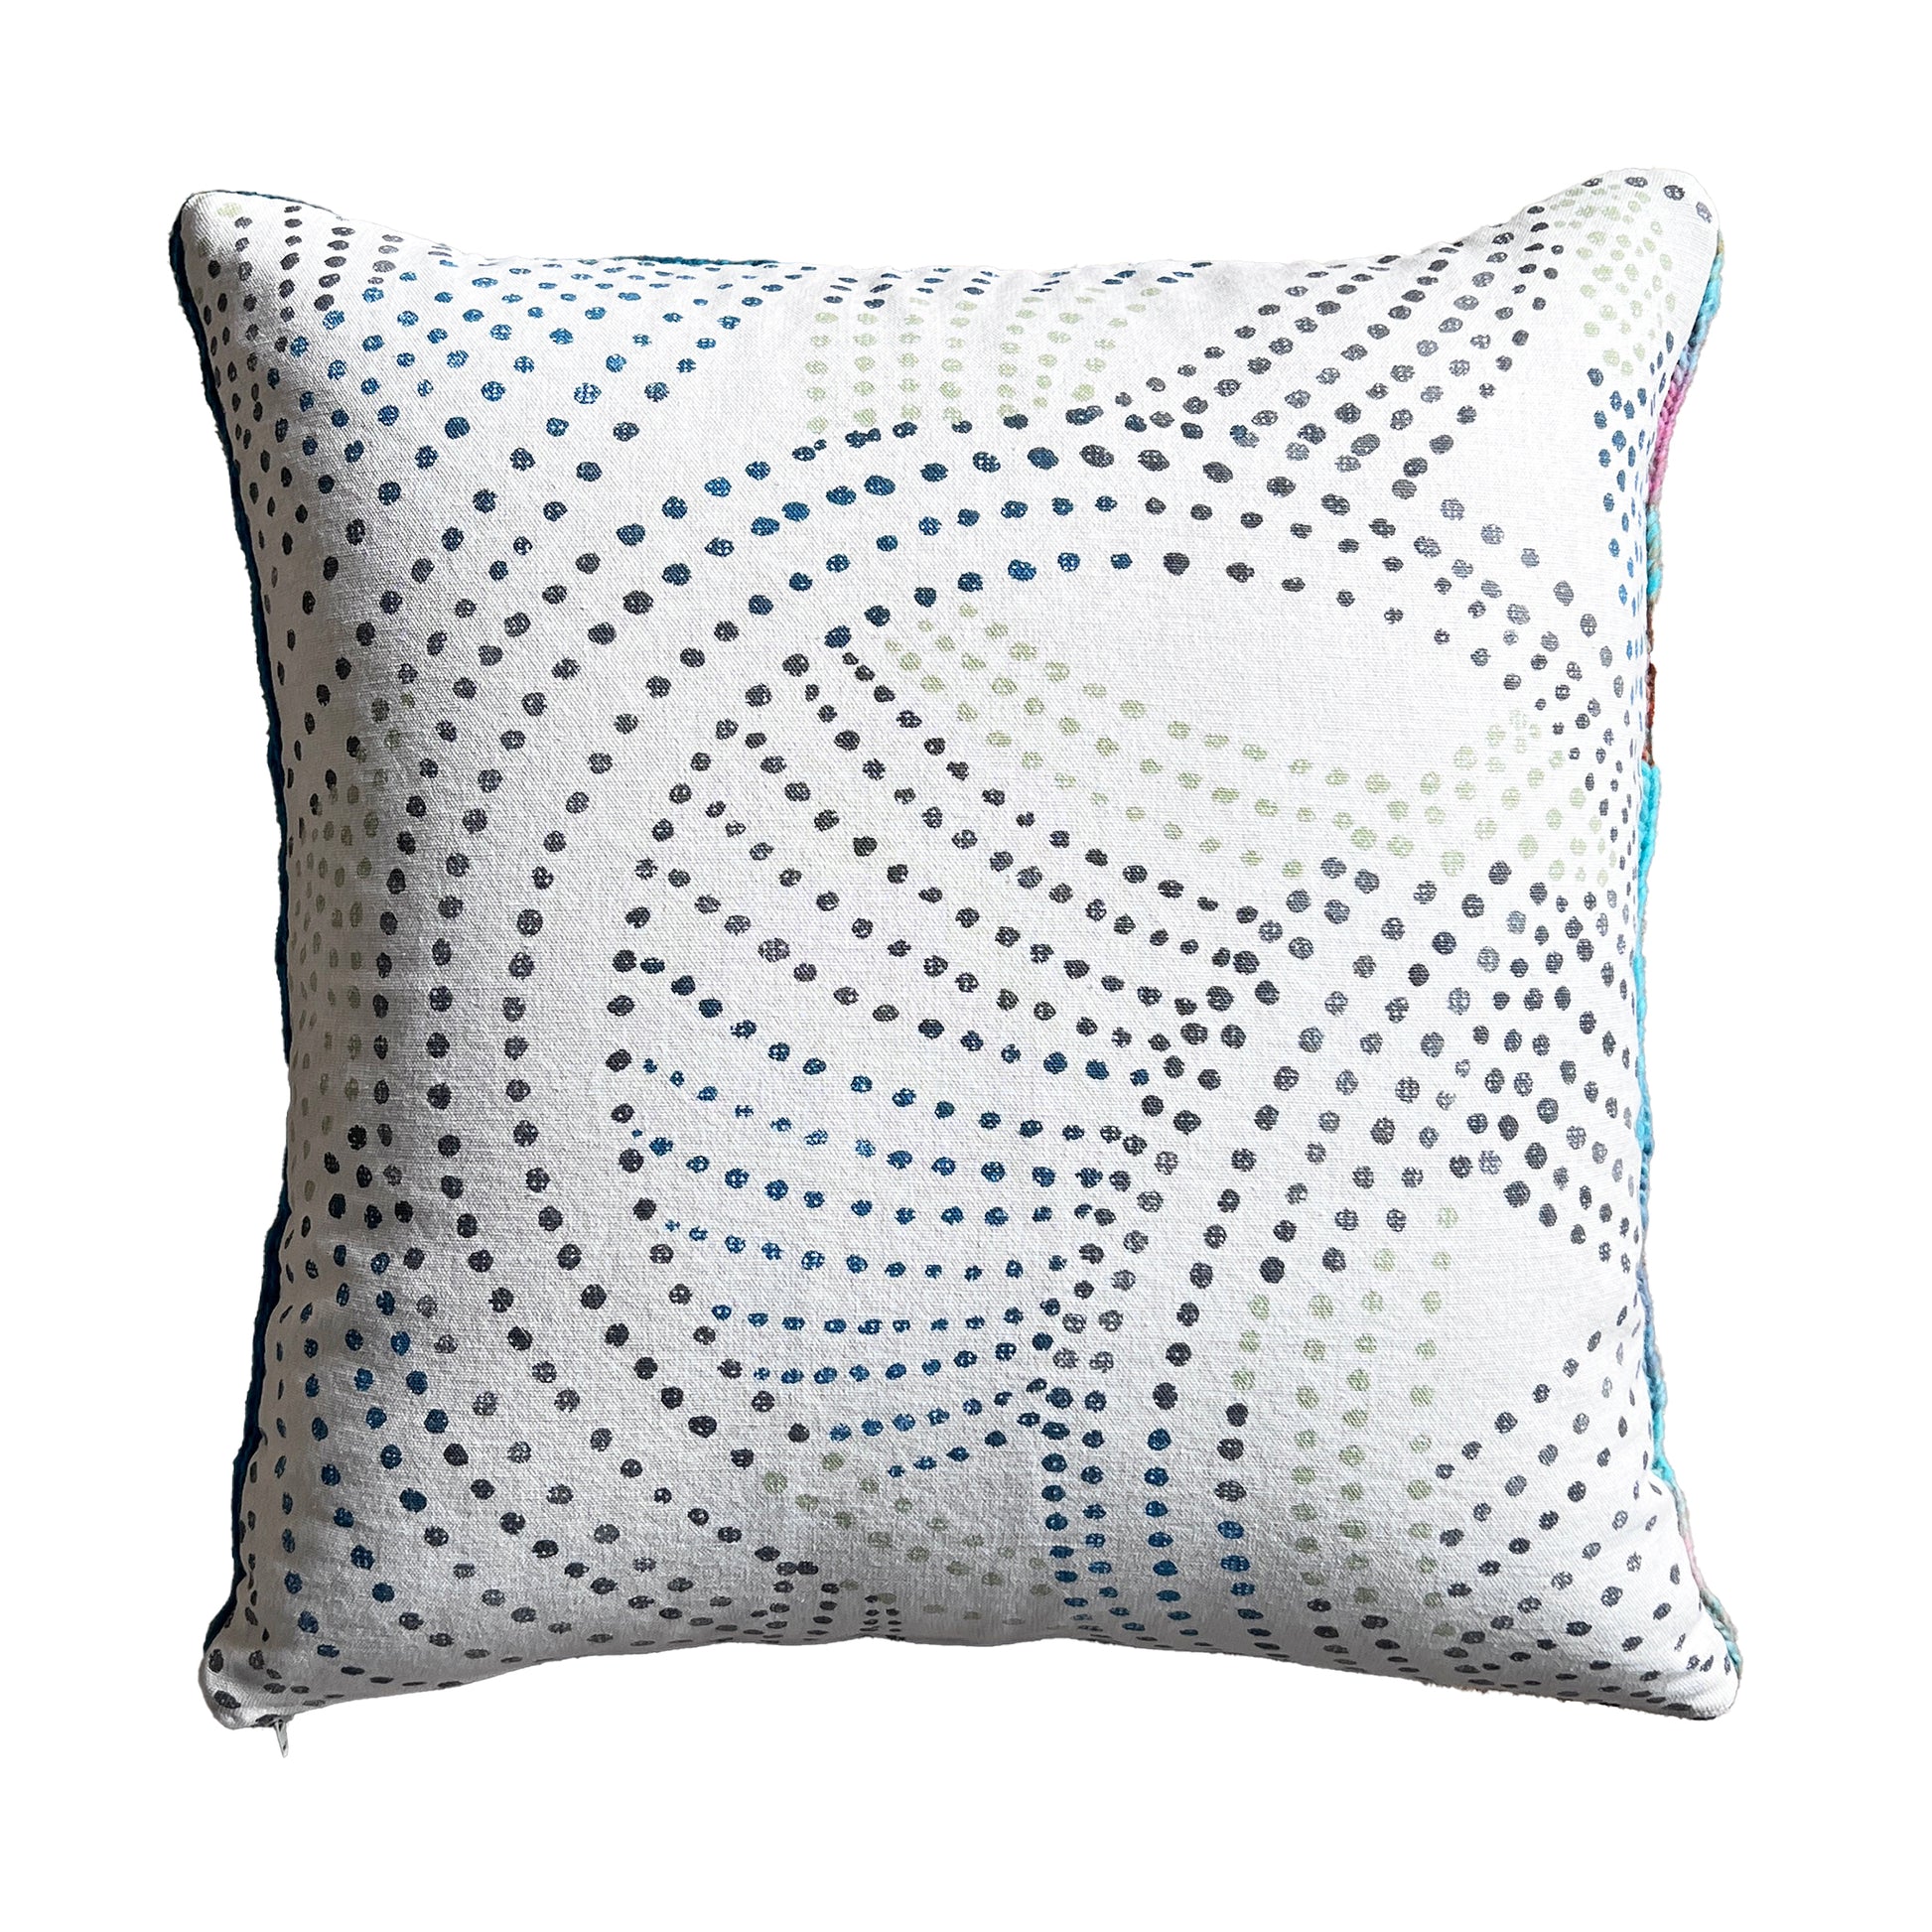 The back side of this pillow is a natural cotton canvas with a geometric, polka dot print with dots of sage, cerulean, and charcoal (which match perfectly with the colors of the yarn).